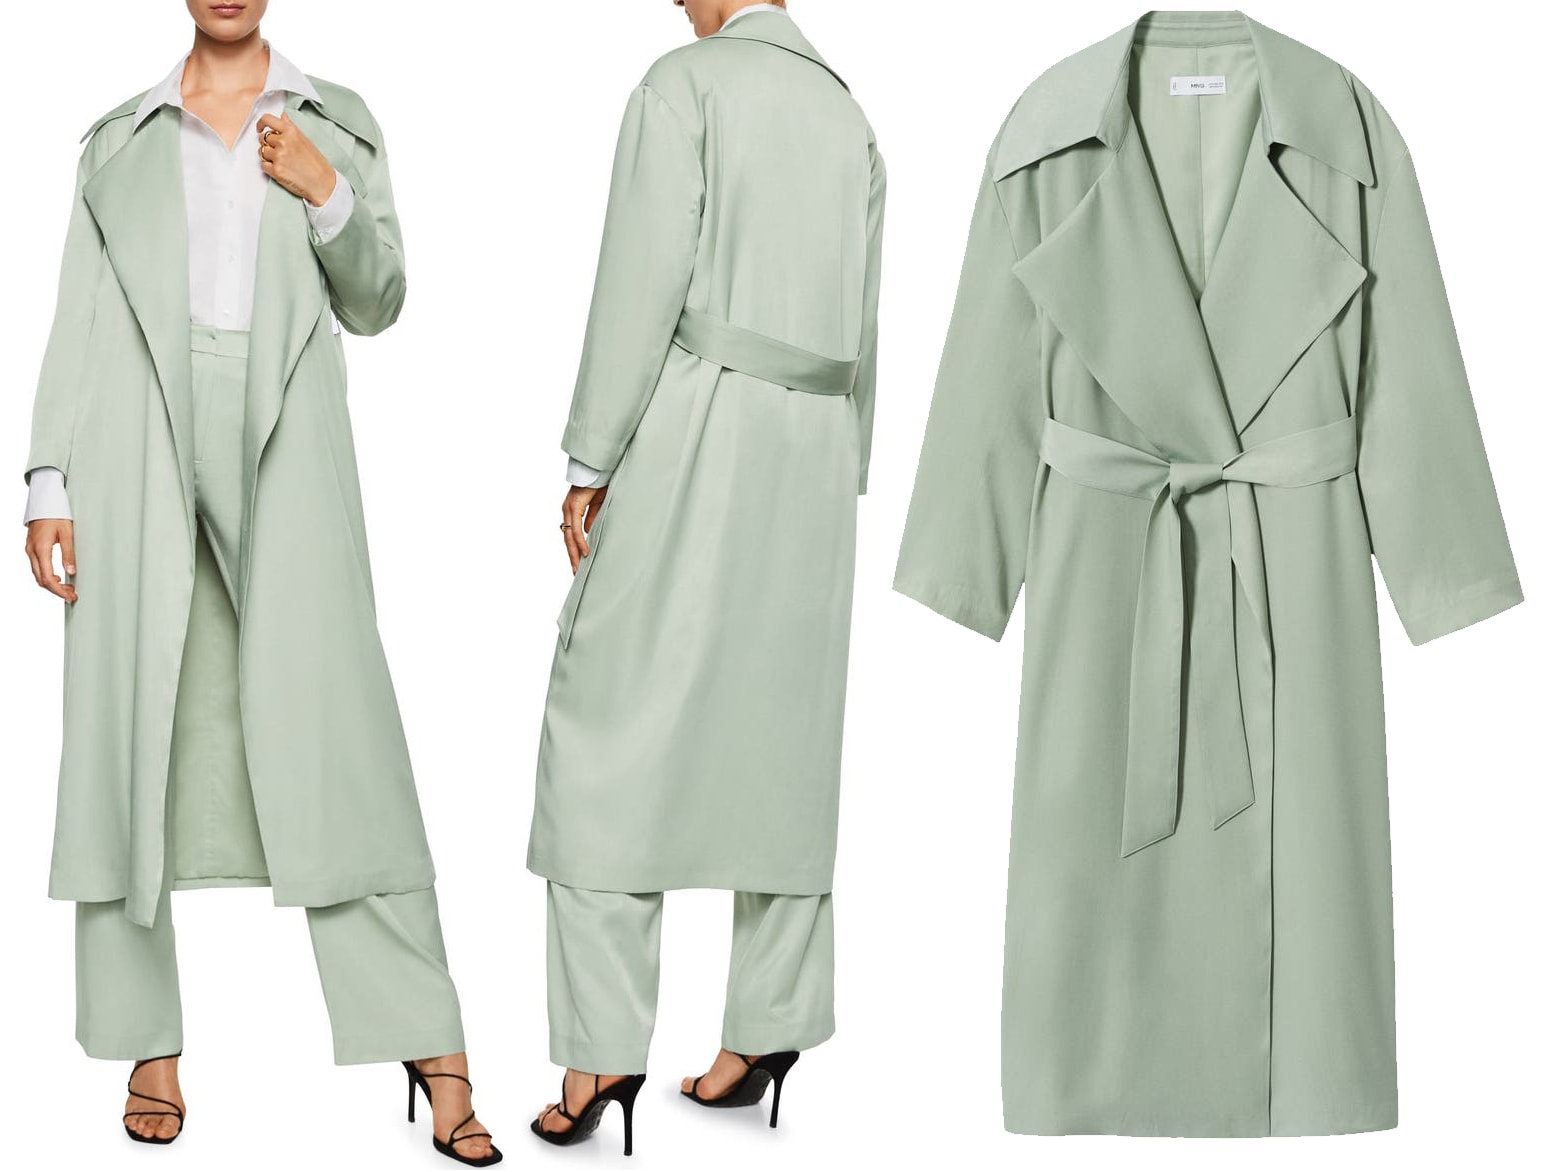 Chic and sophisticated, Mango's fluid trench coat in a delicate pastel green hue, is a stylish fall must-have